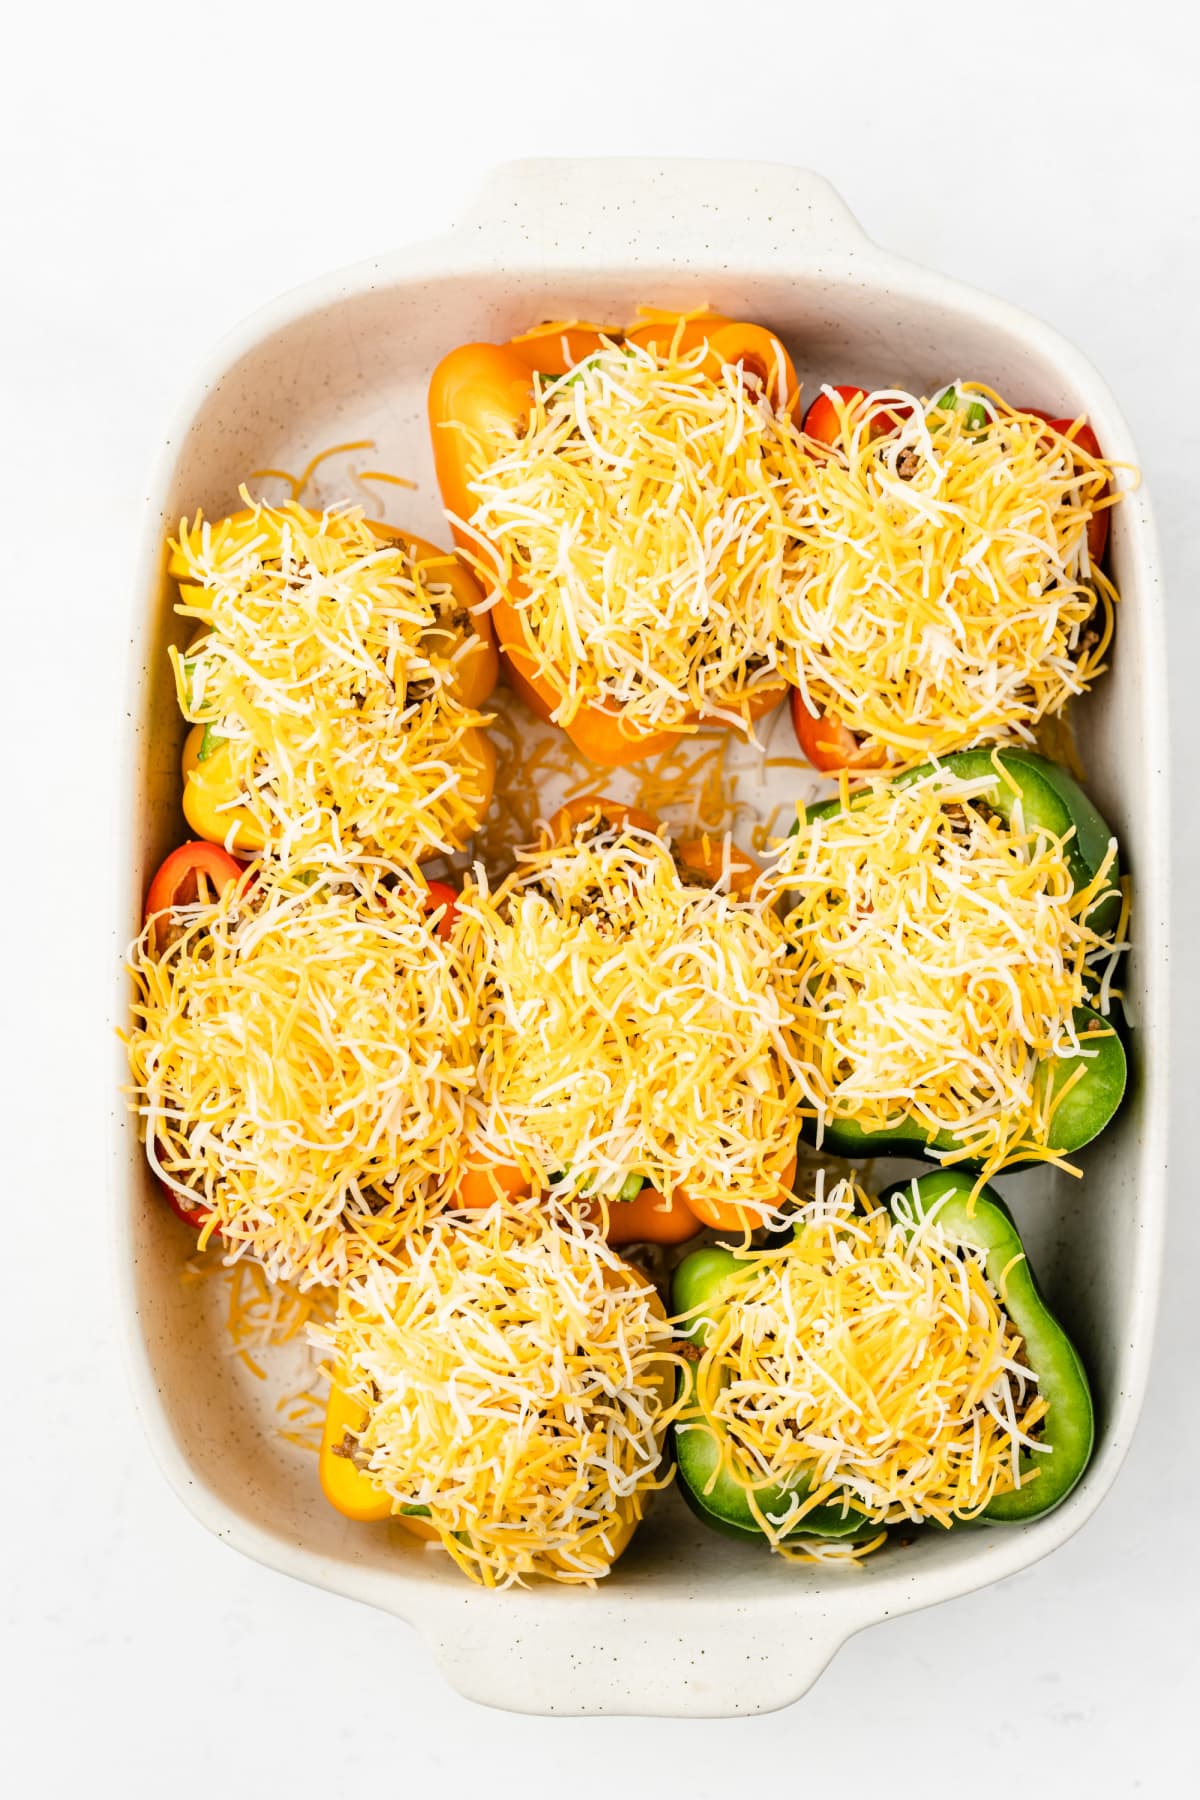 Taco stuffed bell peppers uncooked